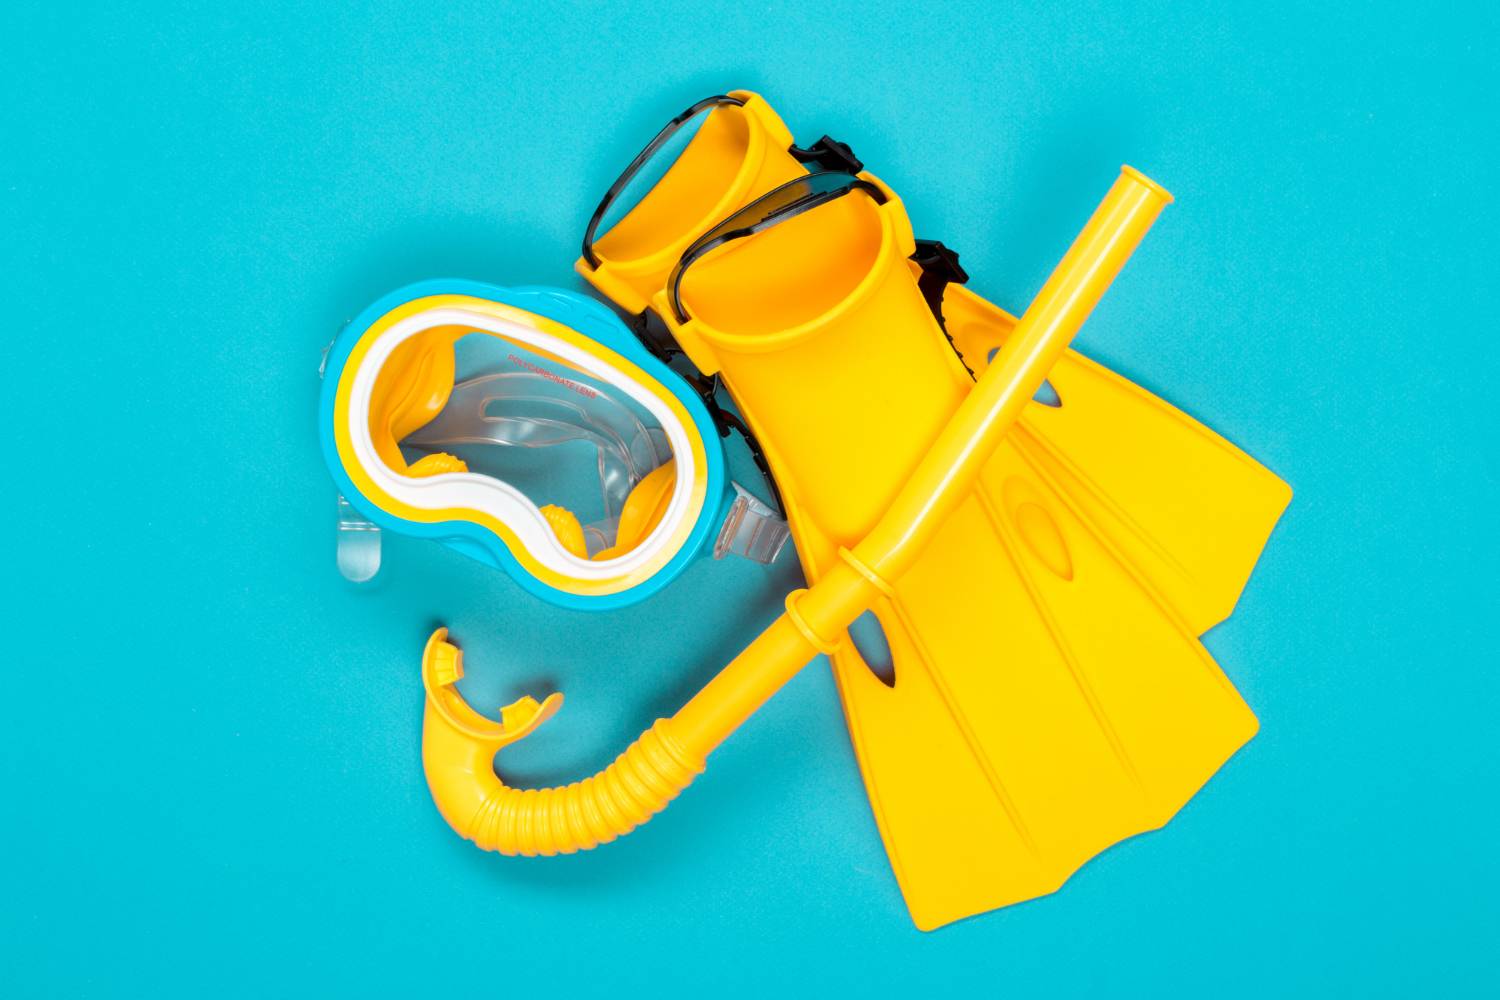 Yellow snorkel gear, including a mask, fins, and snorkel, arranged on a bright turquoise background. Day trip to Shell Island essentials.